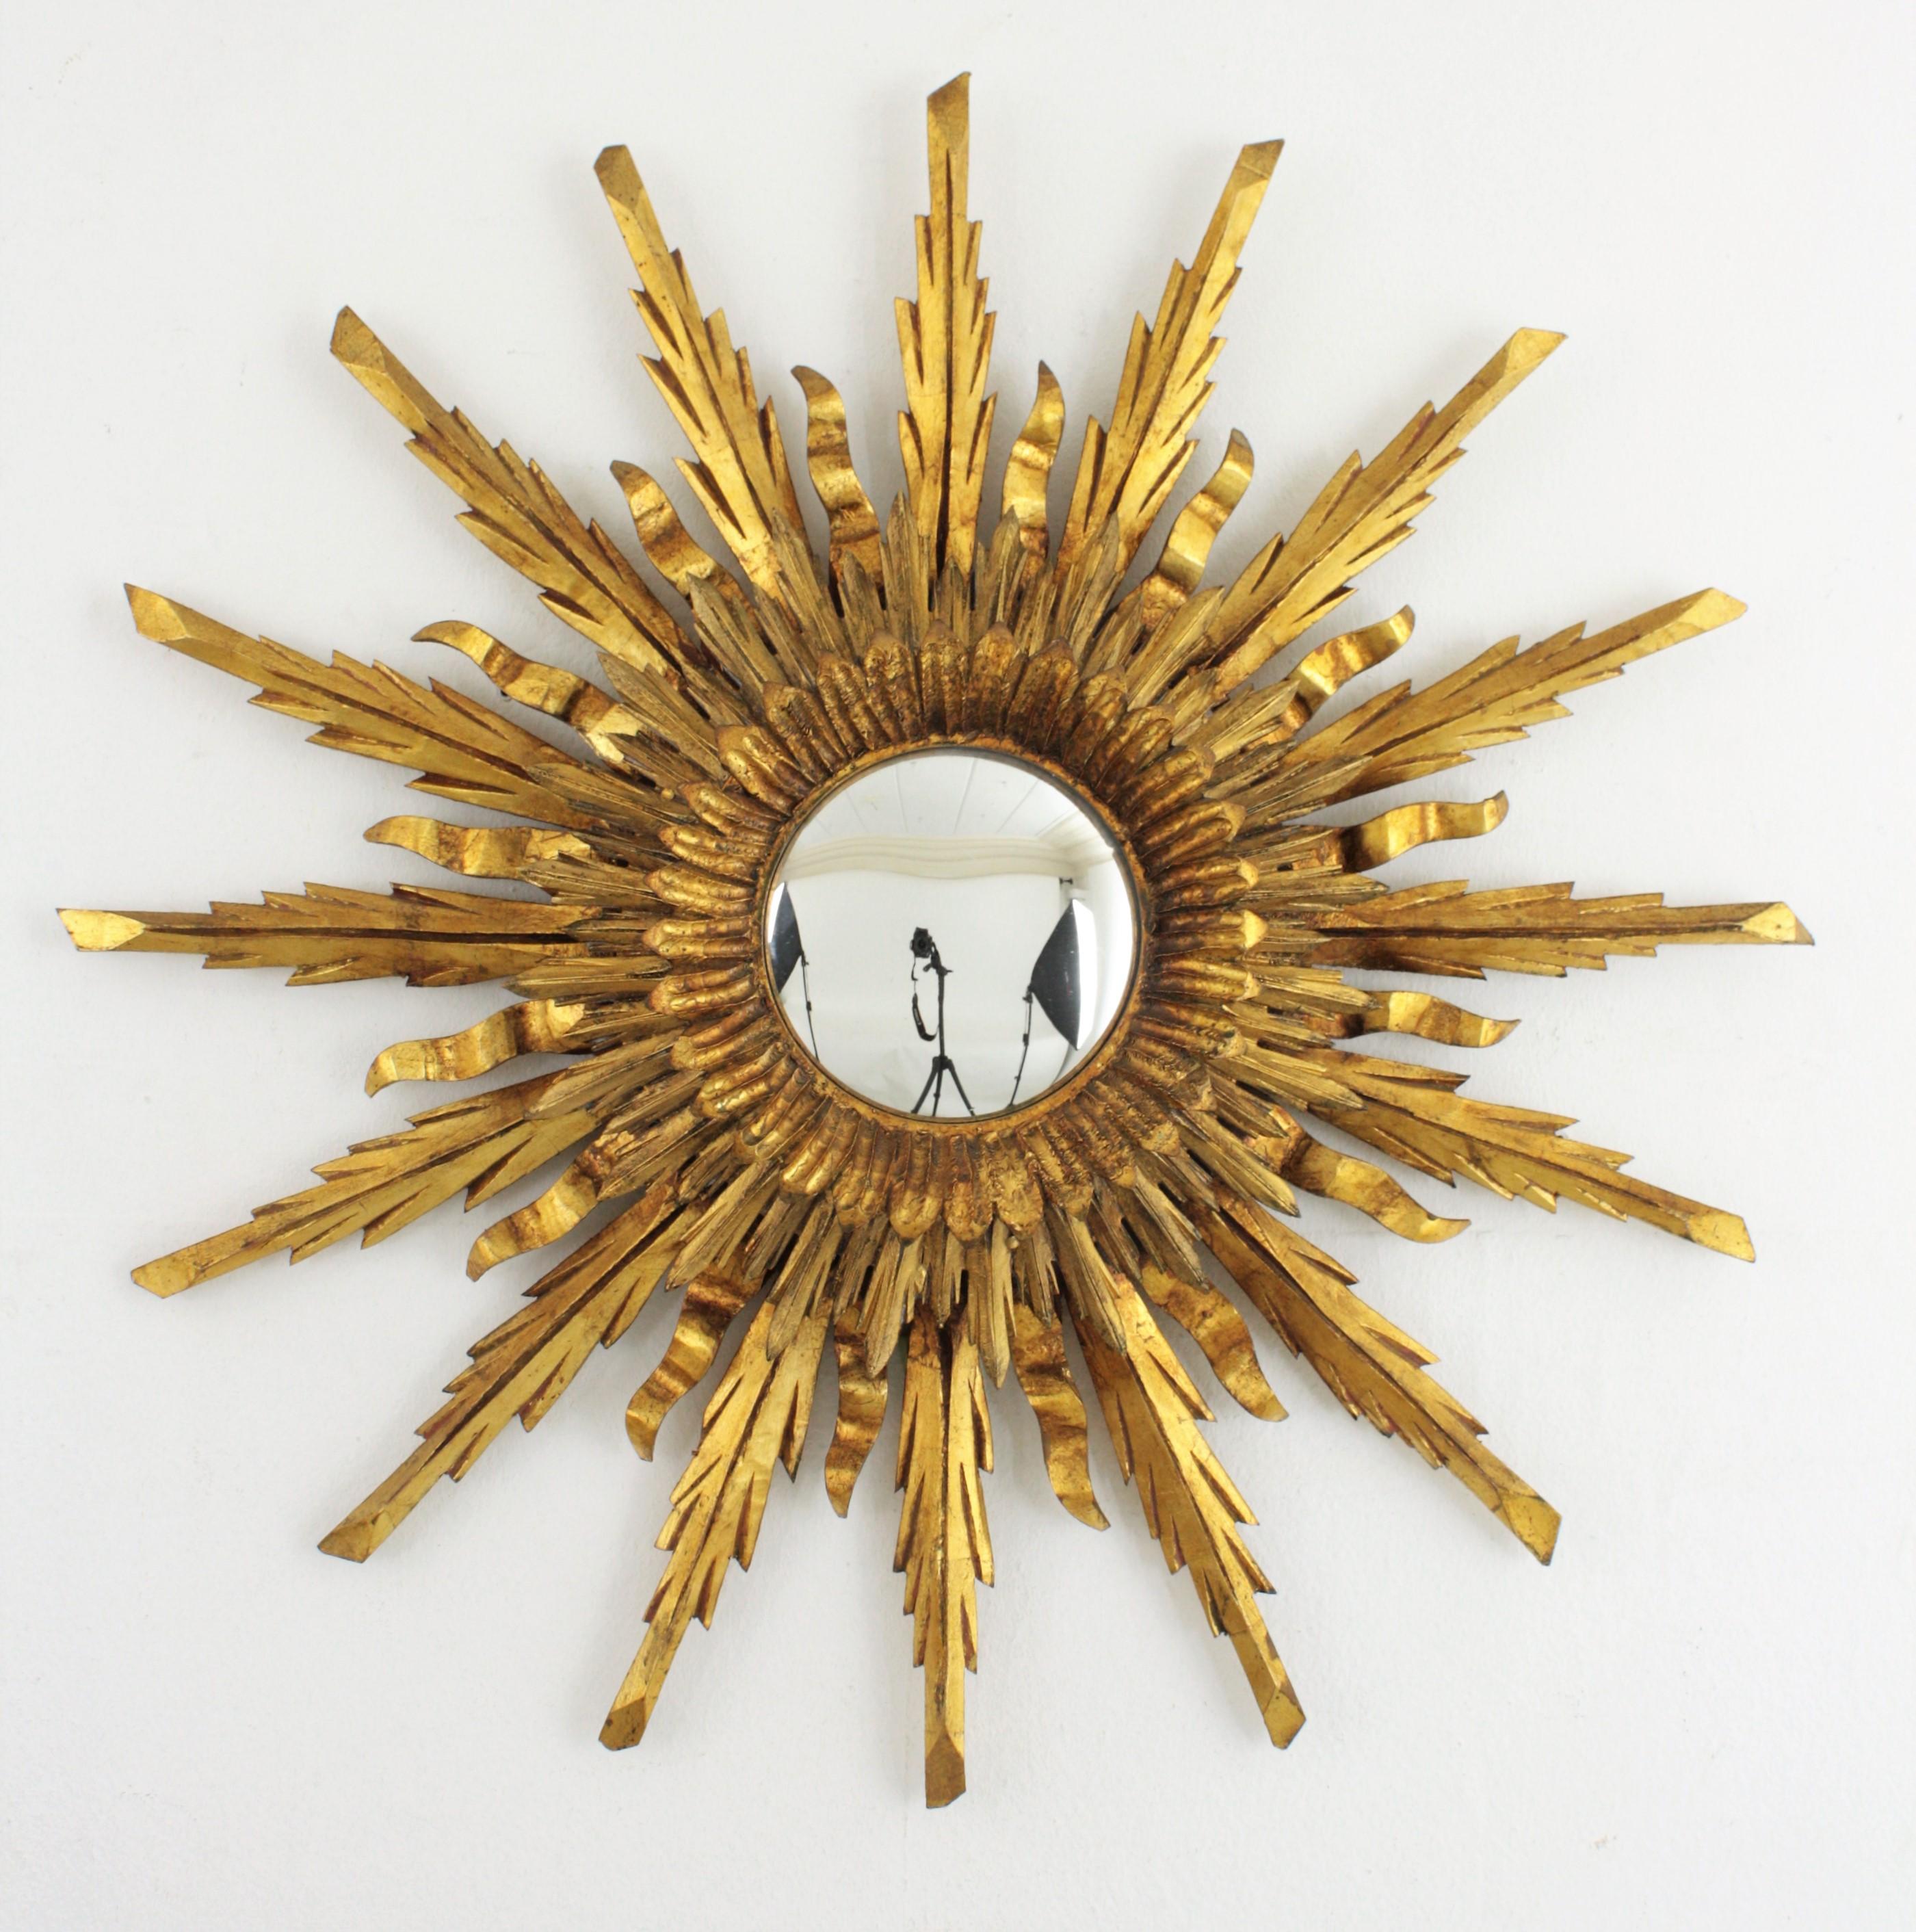 An spectacular gold leaf gilt sunburst flush mount or ceiling light fixture in Baroque style made in Spain, circa 1930-1940. Large size with two layers of beams in different sizes that make this piece gorgeous and highly decorative even more face to